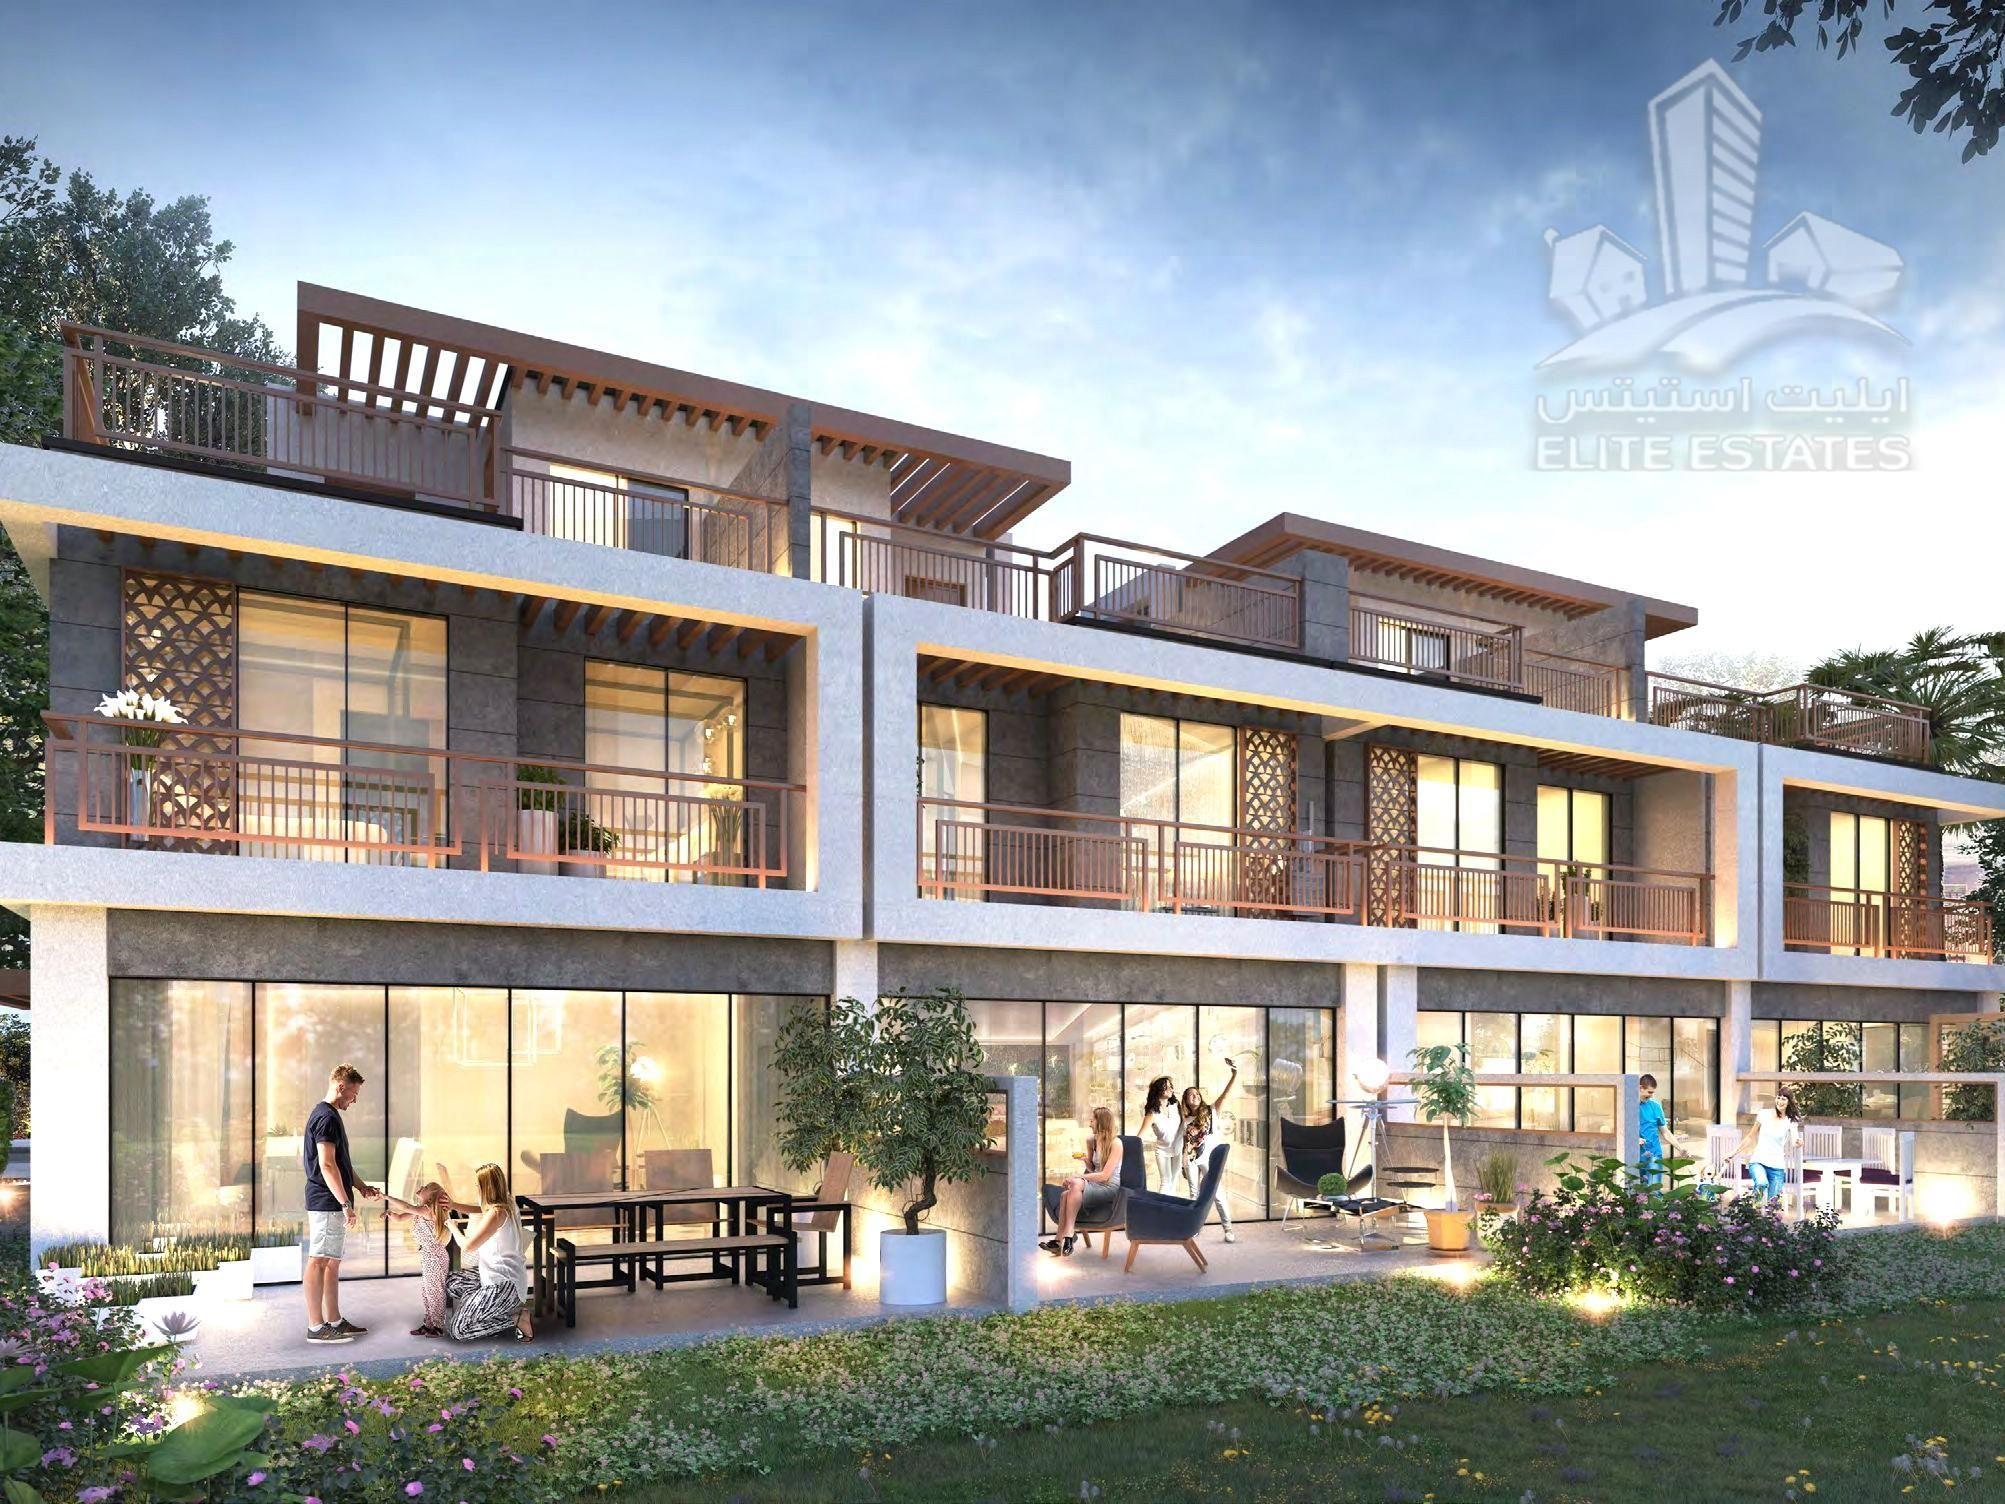 Real Estate_New Projects - Villas for Sale_Akoya Oxygen